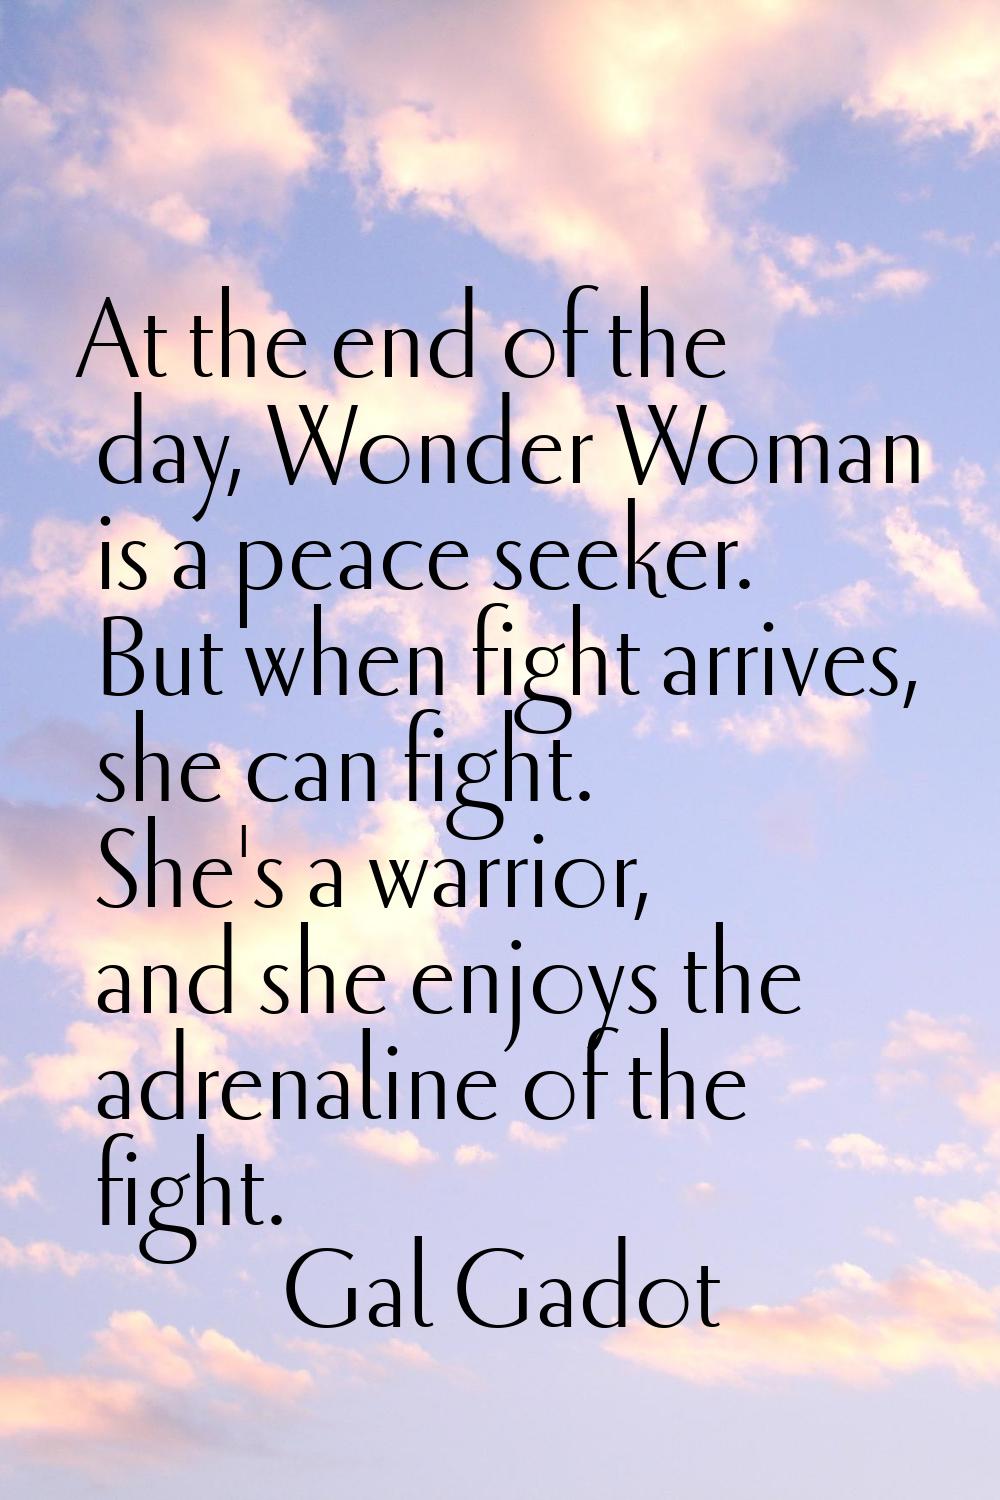 At the end of the day, Wonder Woman is a peace seeker. But when fight arrives, she can fight. She's